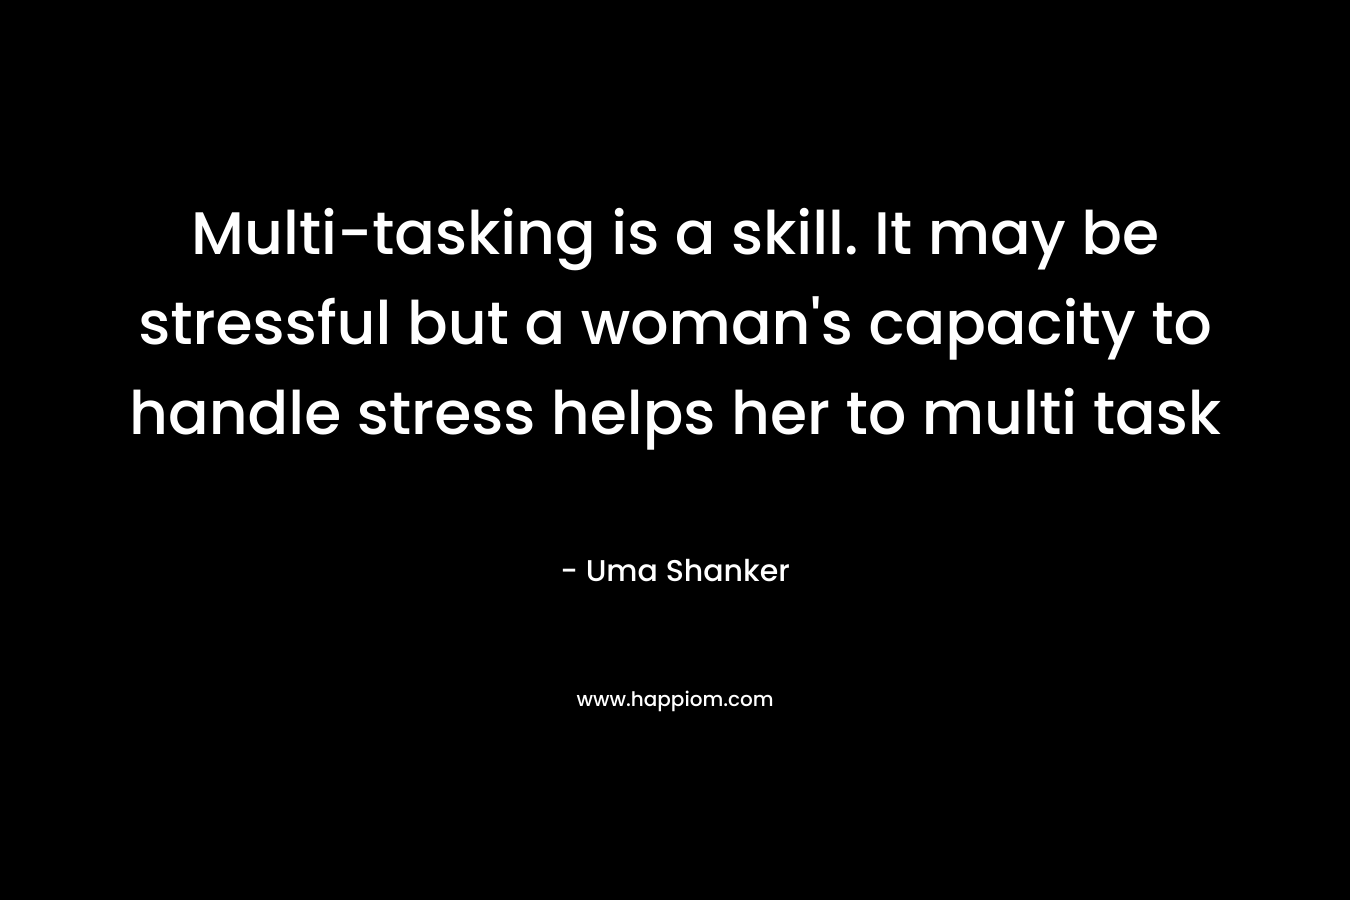 Multi-tasking is a skill. It may be stressful but a woman's capacity to handle stress helps her to multi task